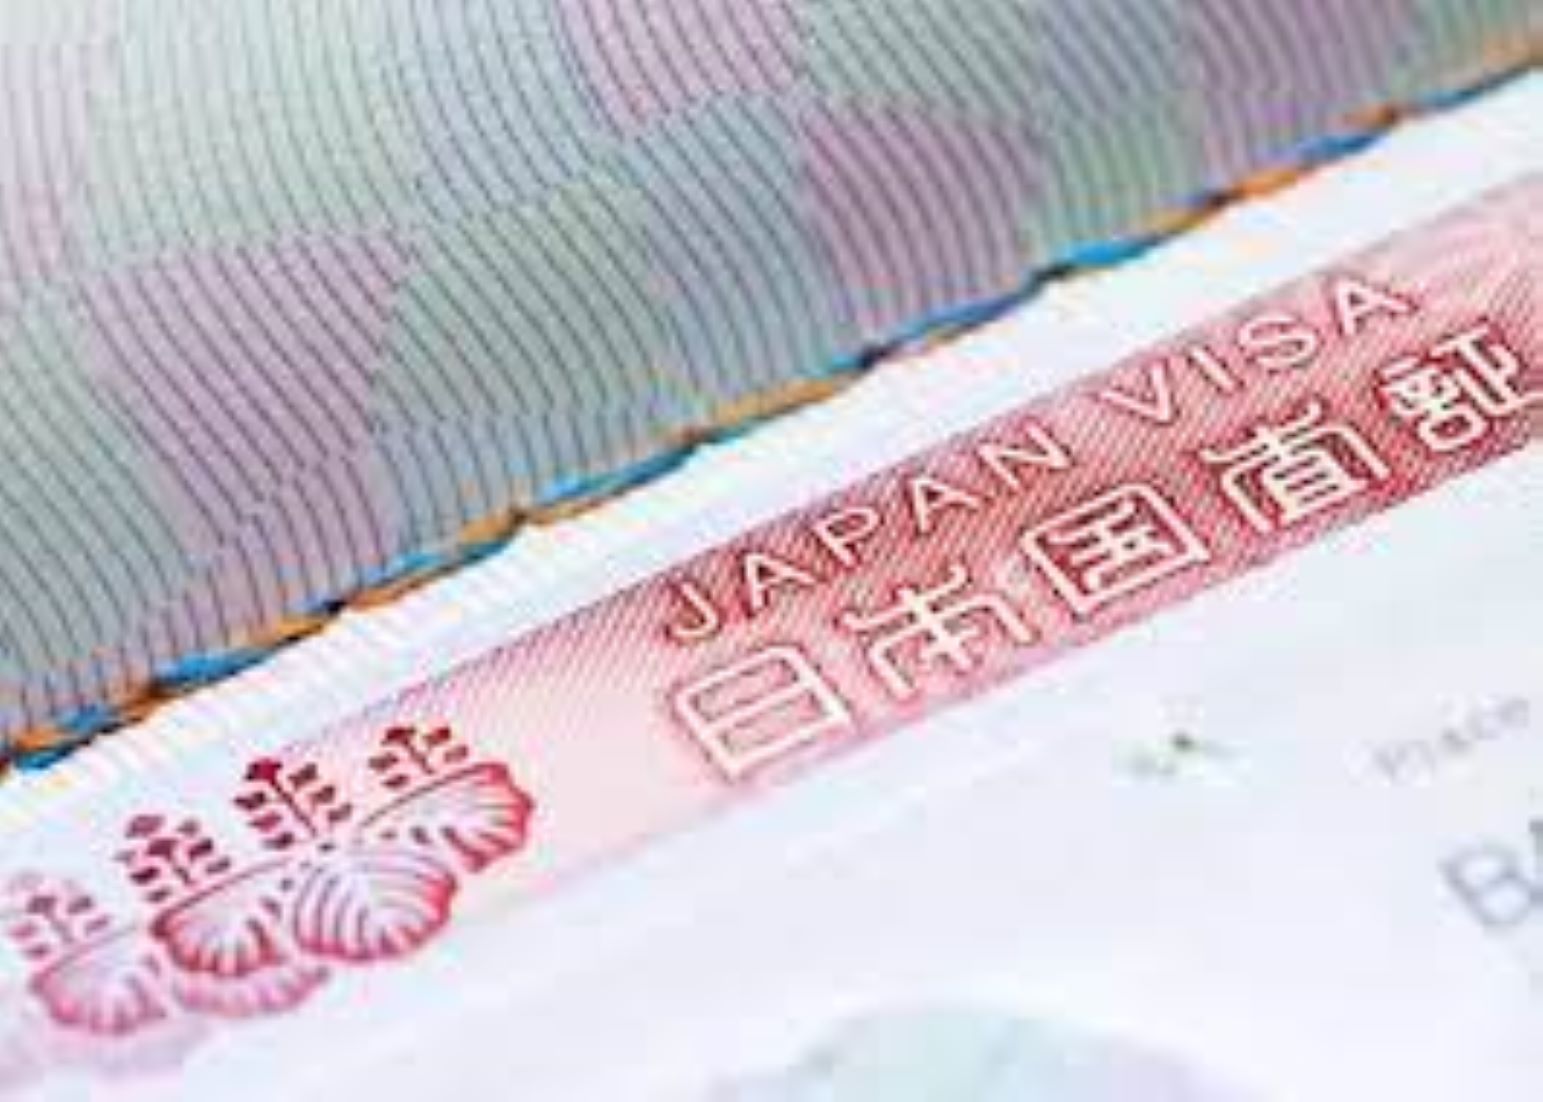 Japan To Launch New Visa System Next Week To Woo Foreign Talents